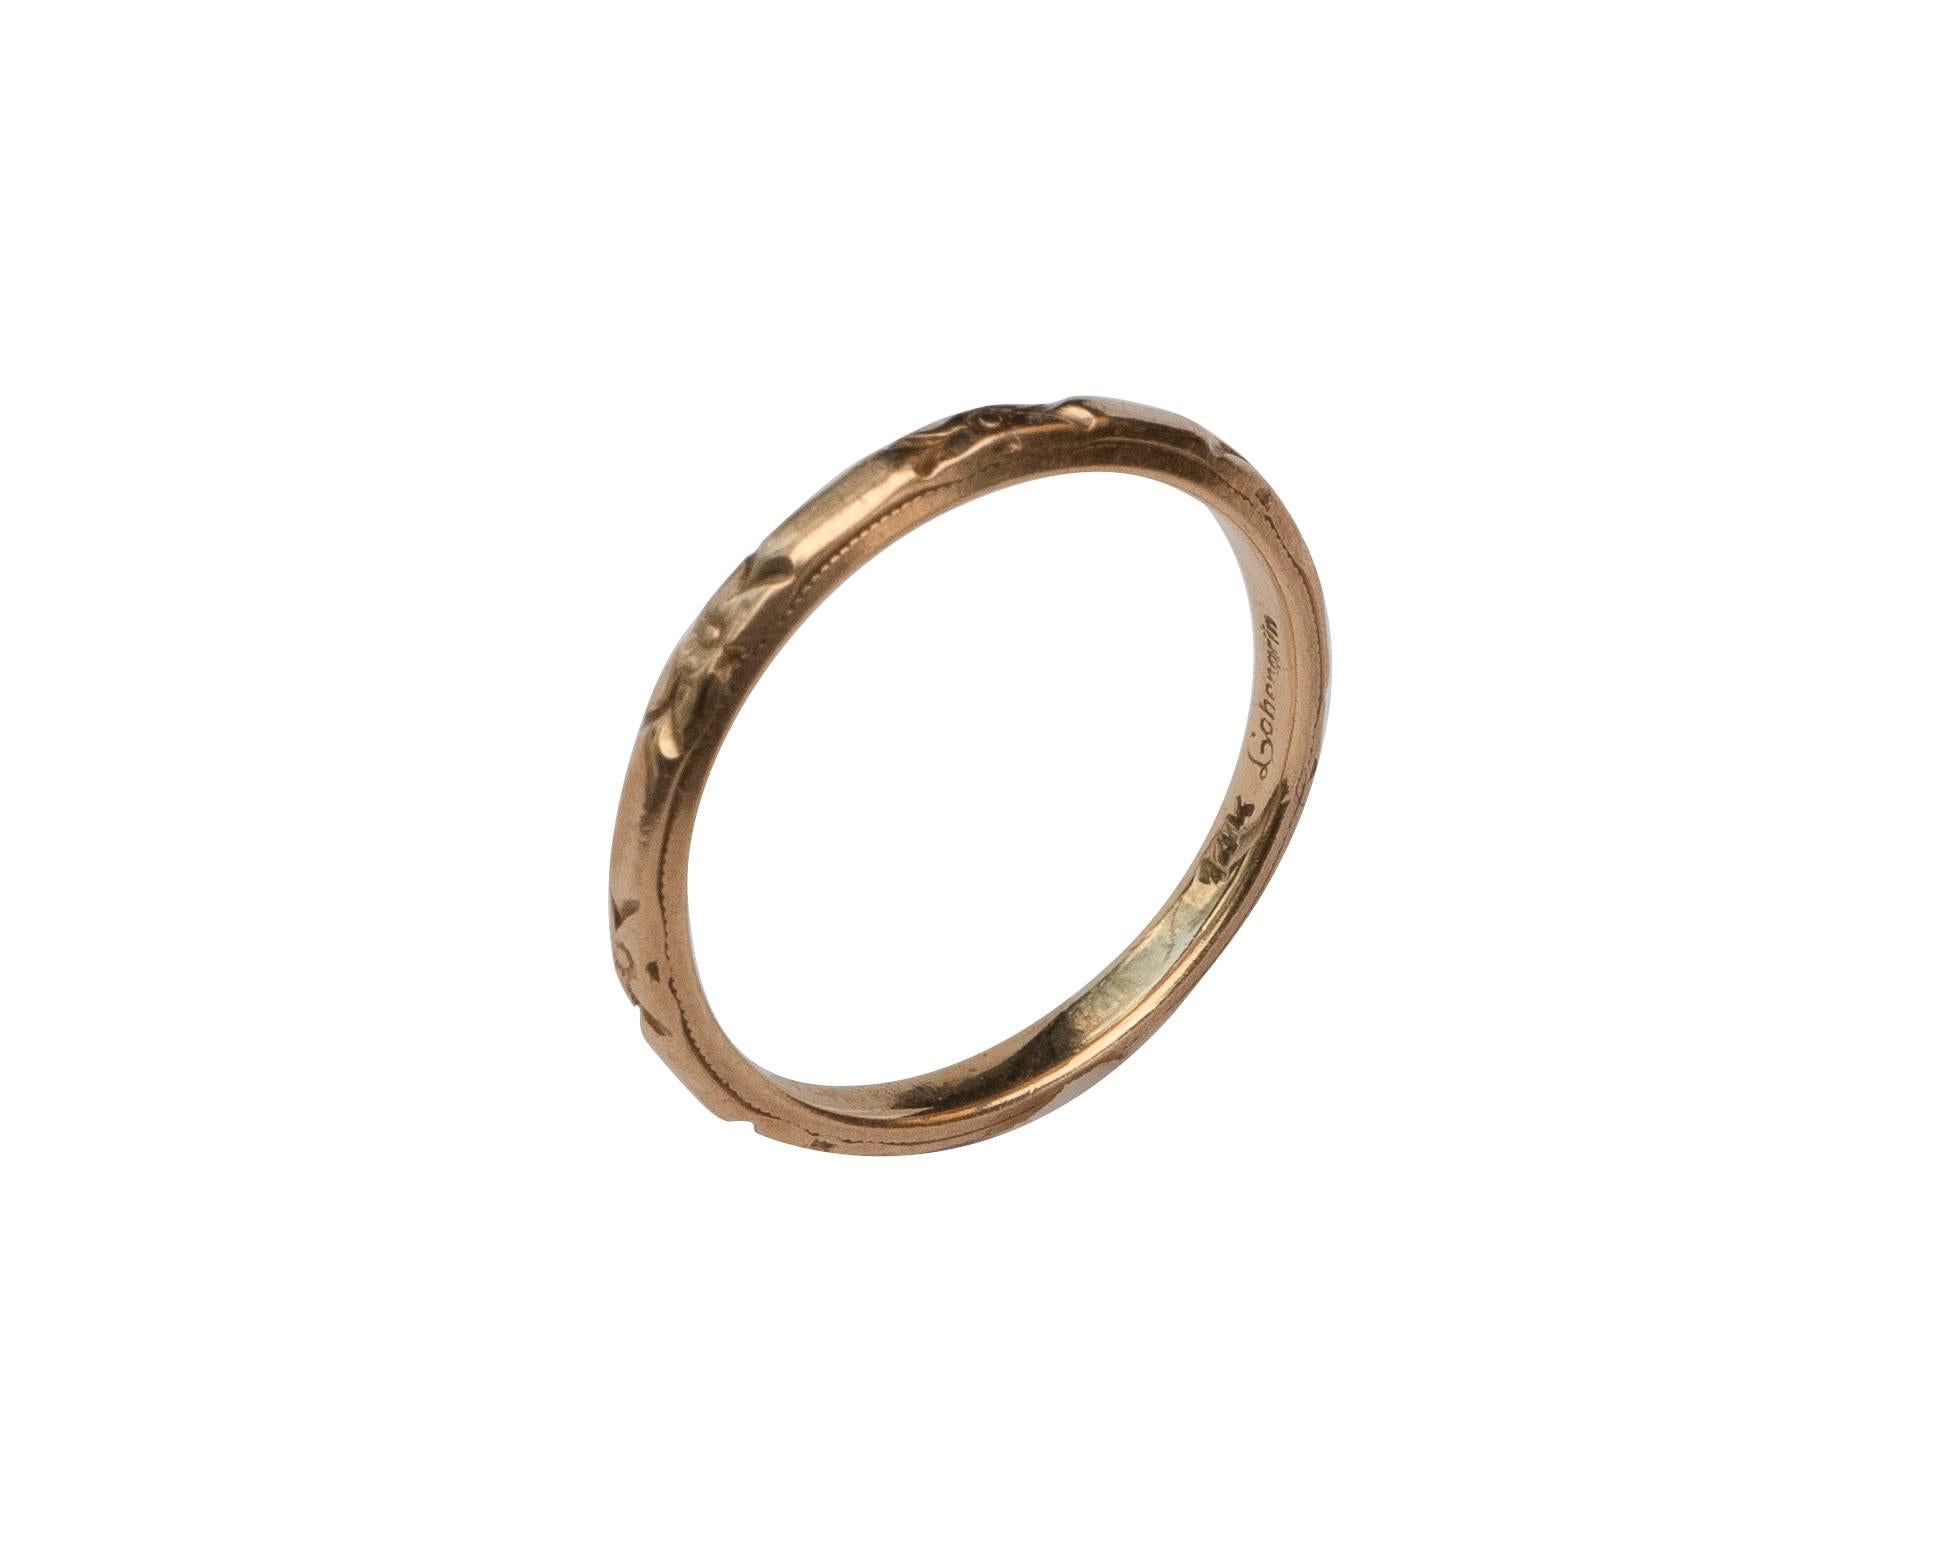 This piece is a genuine Art Deco 1930's yellow gold Lohengrin wedding band! This beautiful dainty band is an excellent example of the early 20th-century style! Likely from the 1930's this Art Deco beauty features a floral carved design all of the